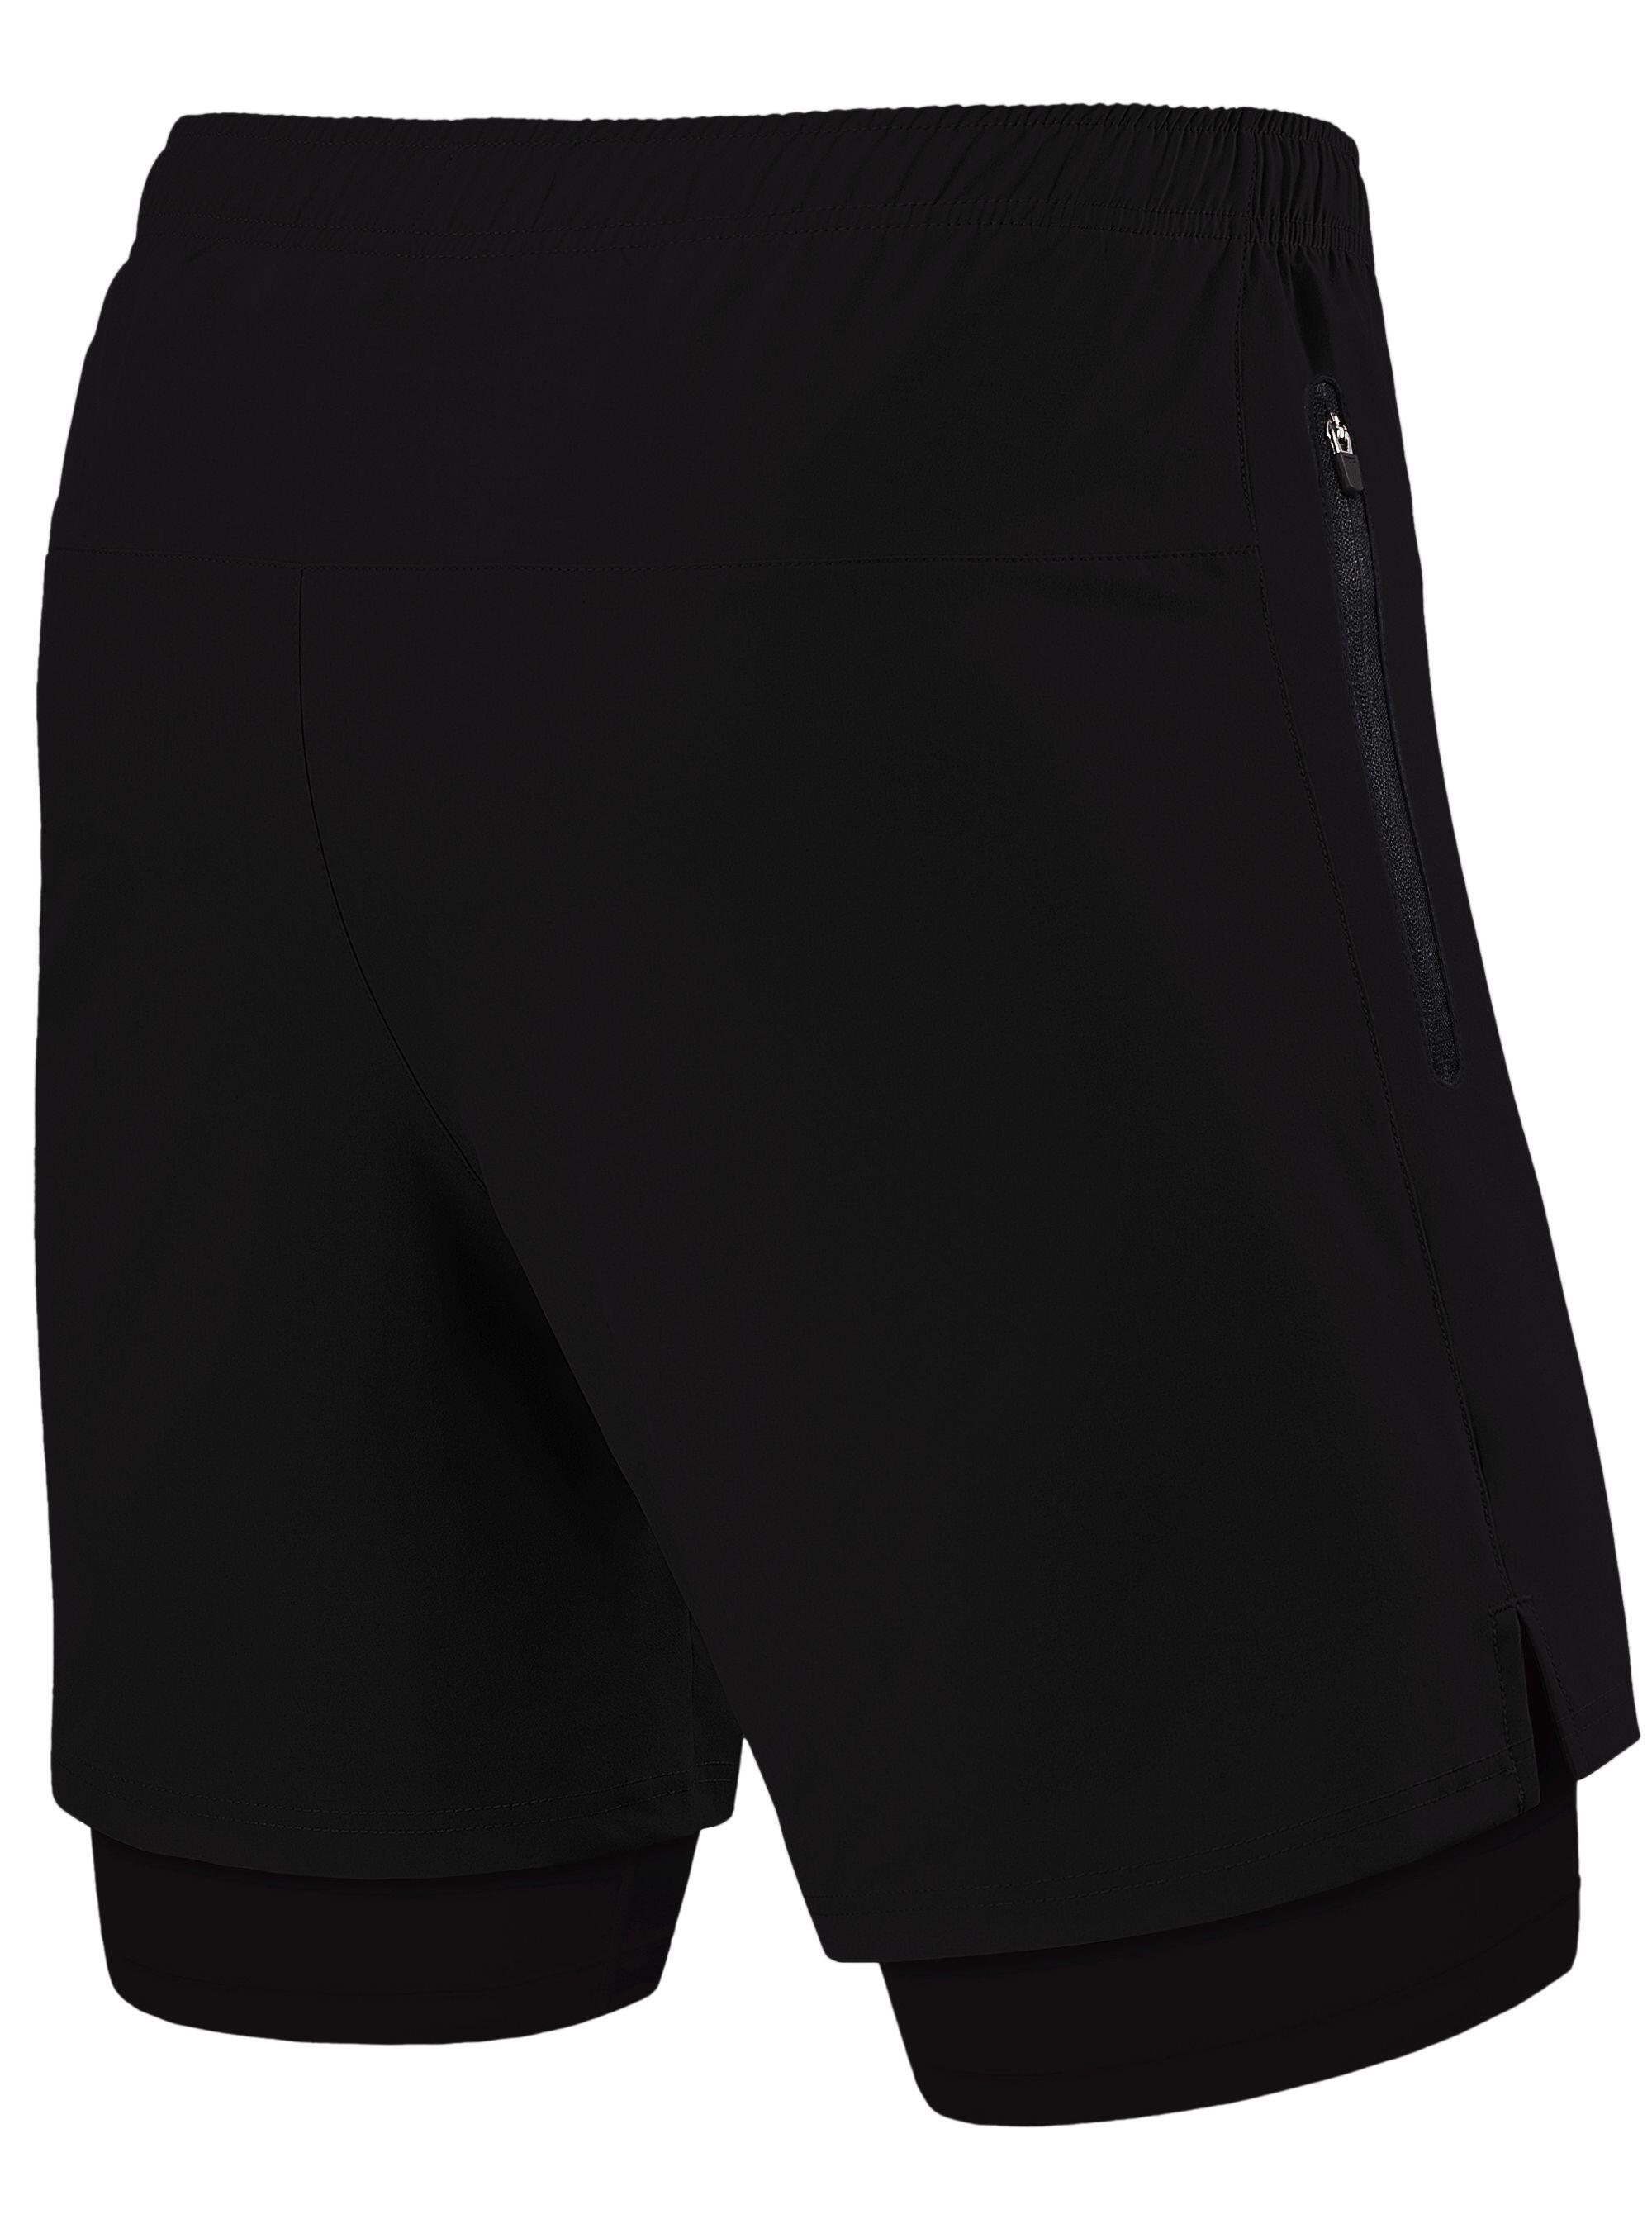 Men's Ultra 2-in-1 Running Shorts with Zip Pockets - Anthracite 2/5